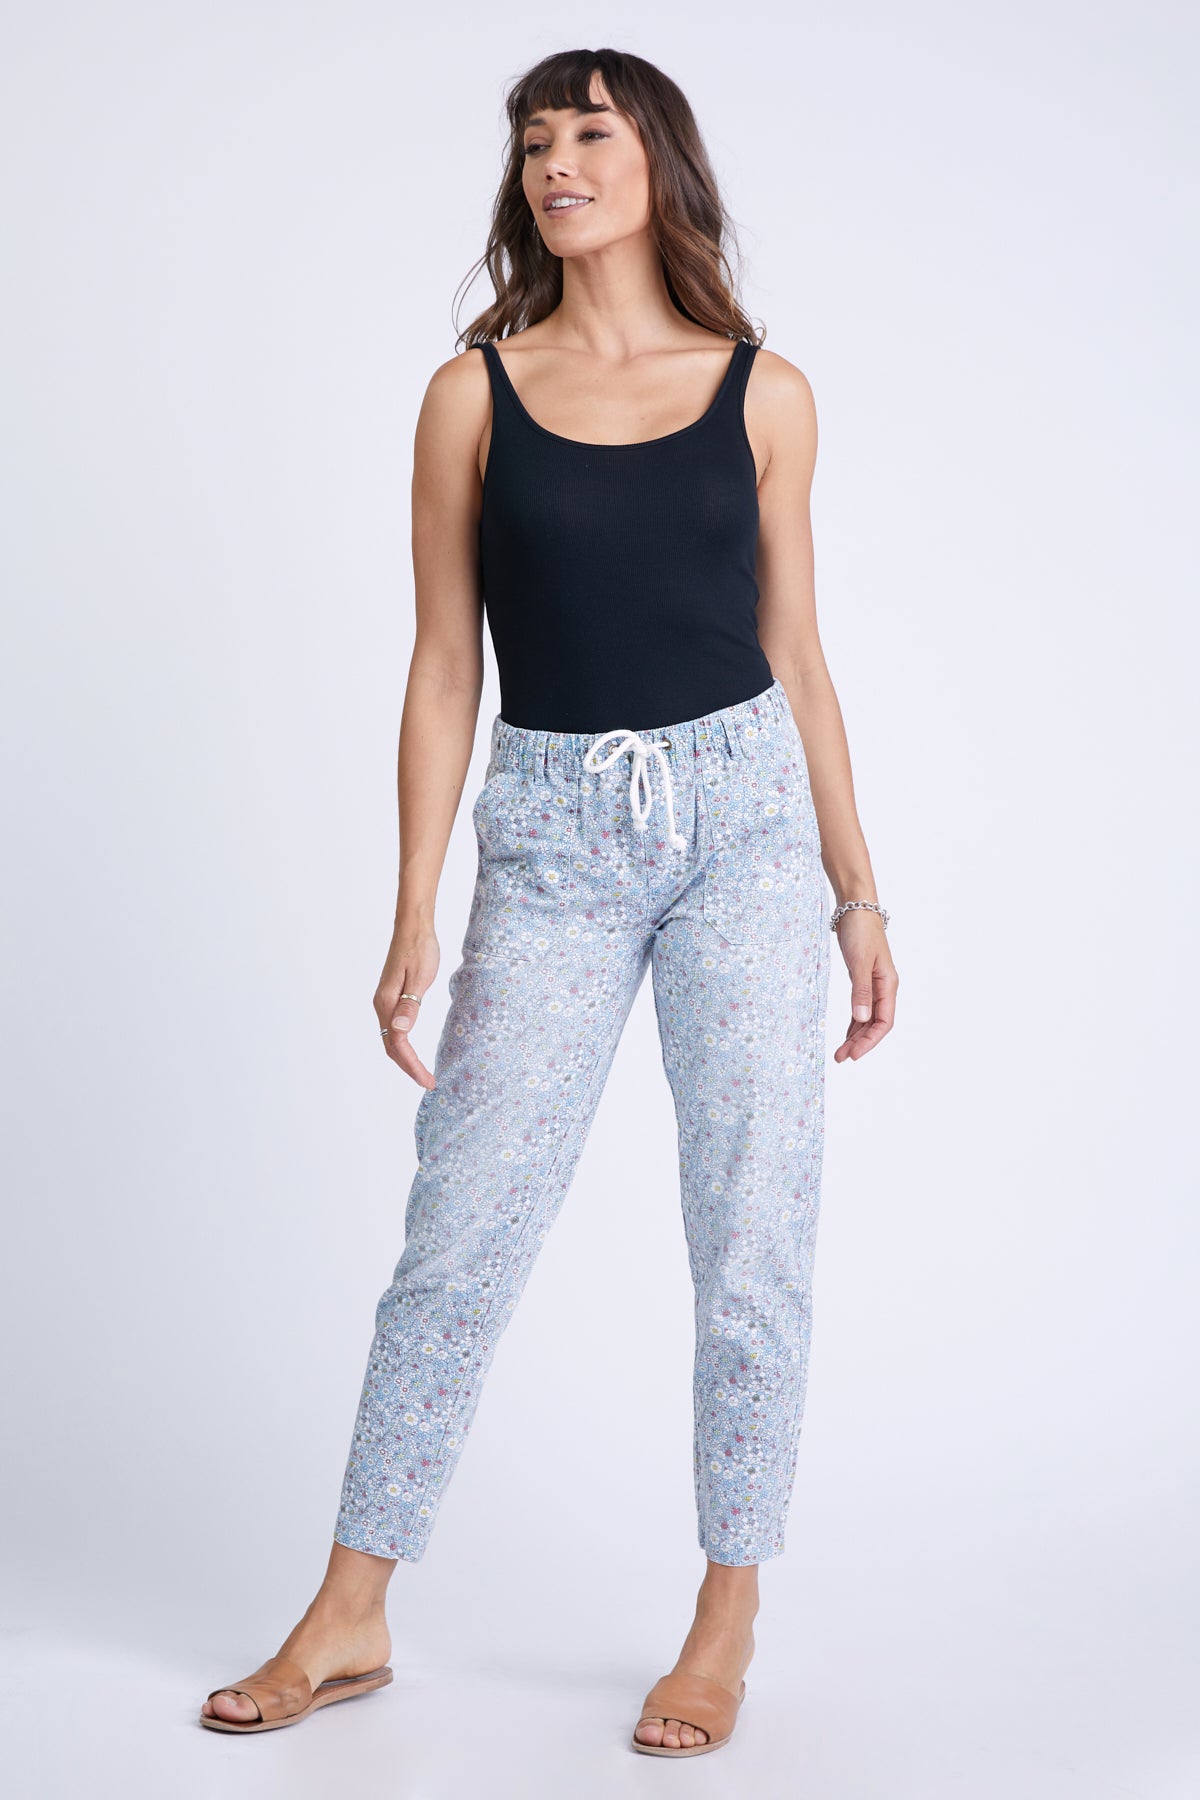 Pants with drawstring in Blue Ditsy Flowers